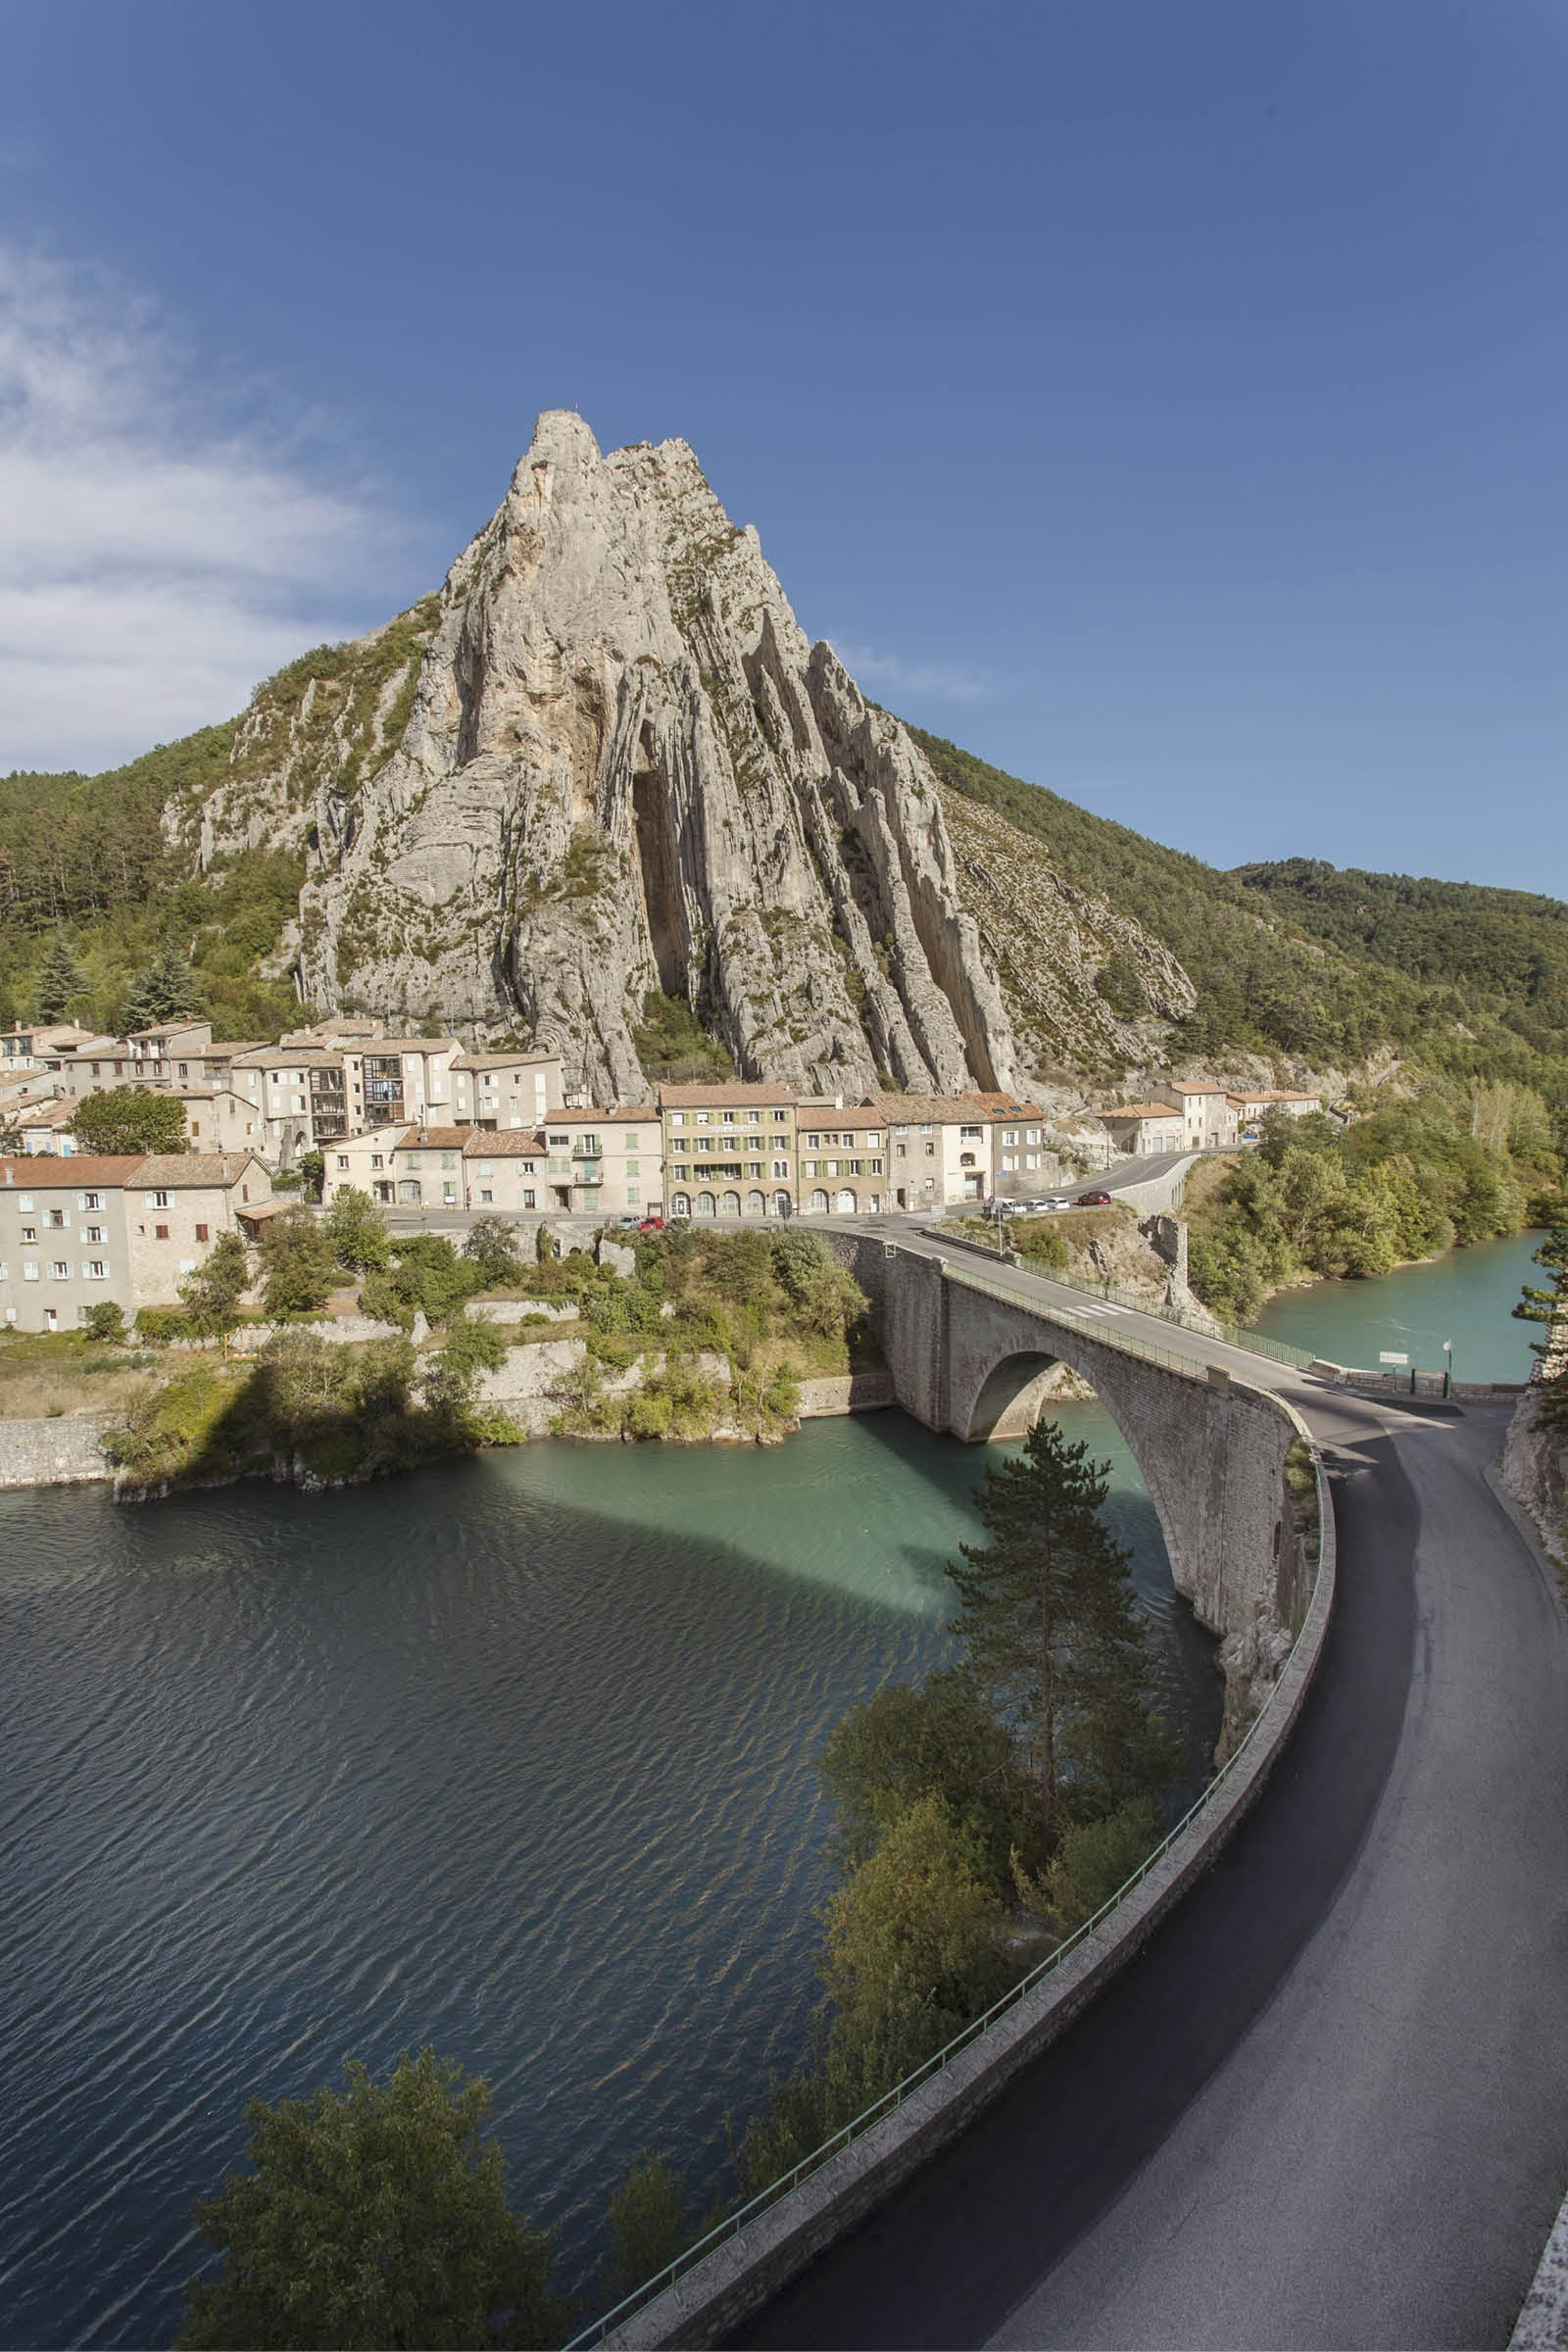 A bridge spans the Durance River at the foot of cliffs in Sisteron